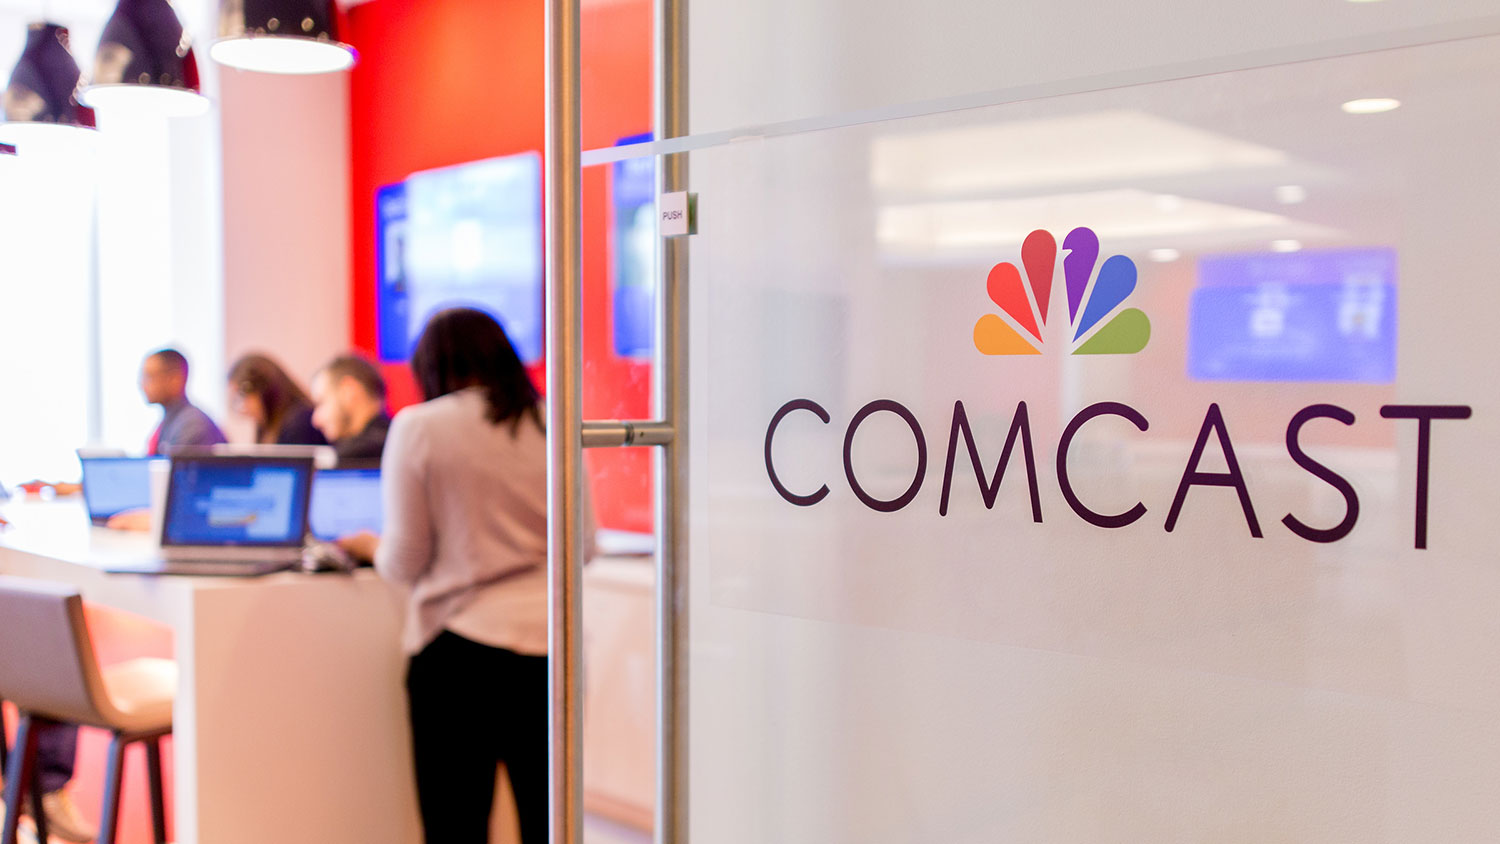 comcast mobile phone service offices feat